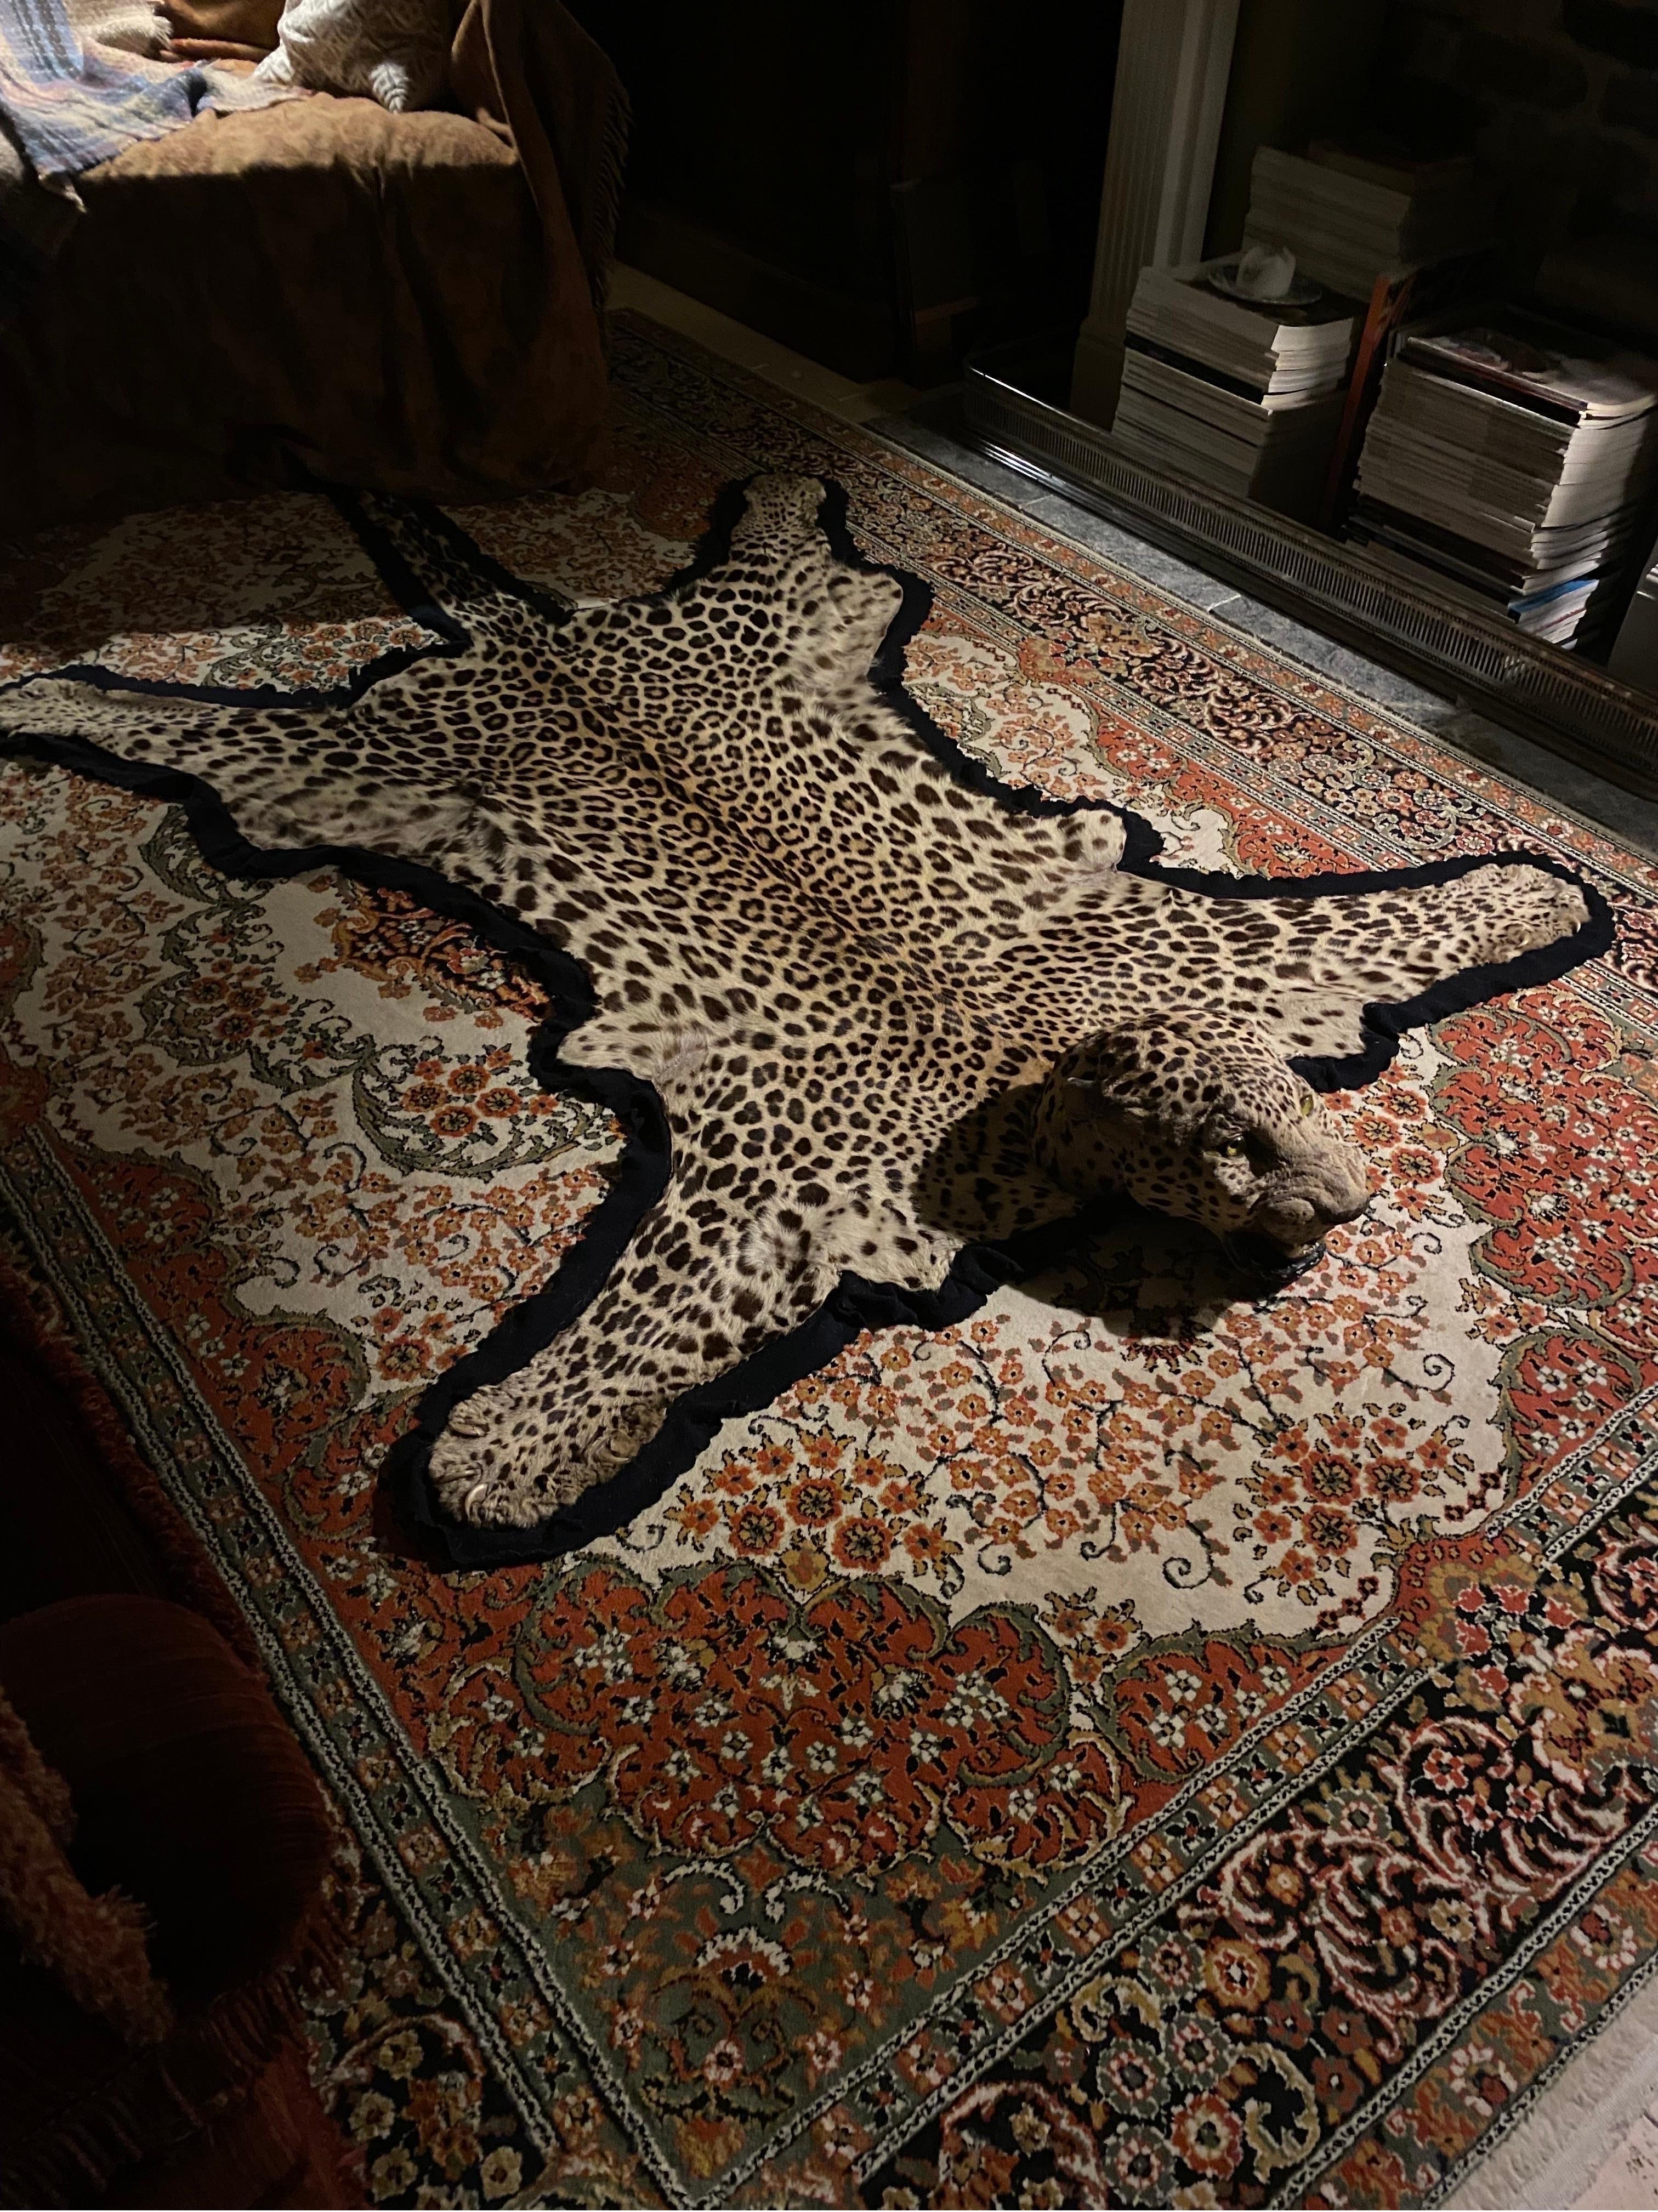 A wonderful example of an Edwardian leopard skin taxidermy rug with full head by William Tocher. 

The skin is still very supple despite some small tears. The tail is in tact and unbroken. Some restoration to the lower mouth and some skin missing